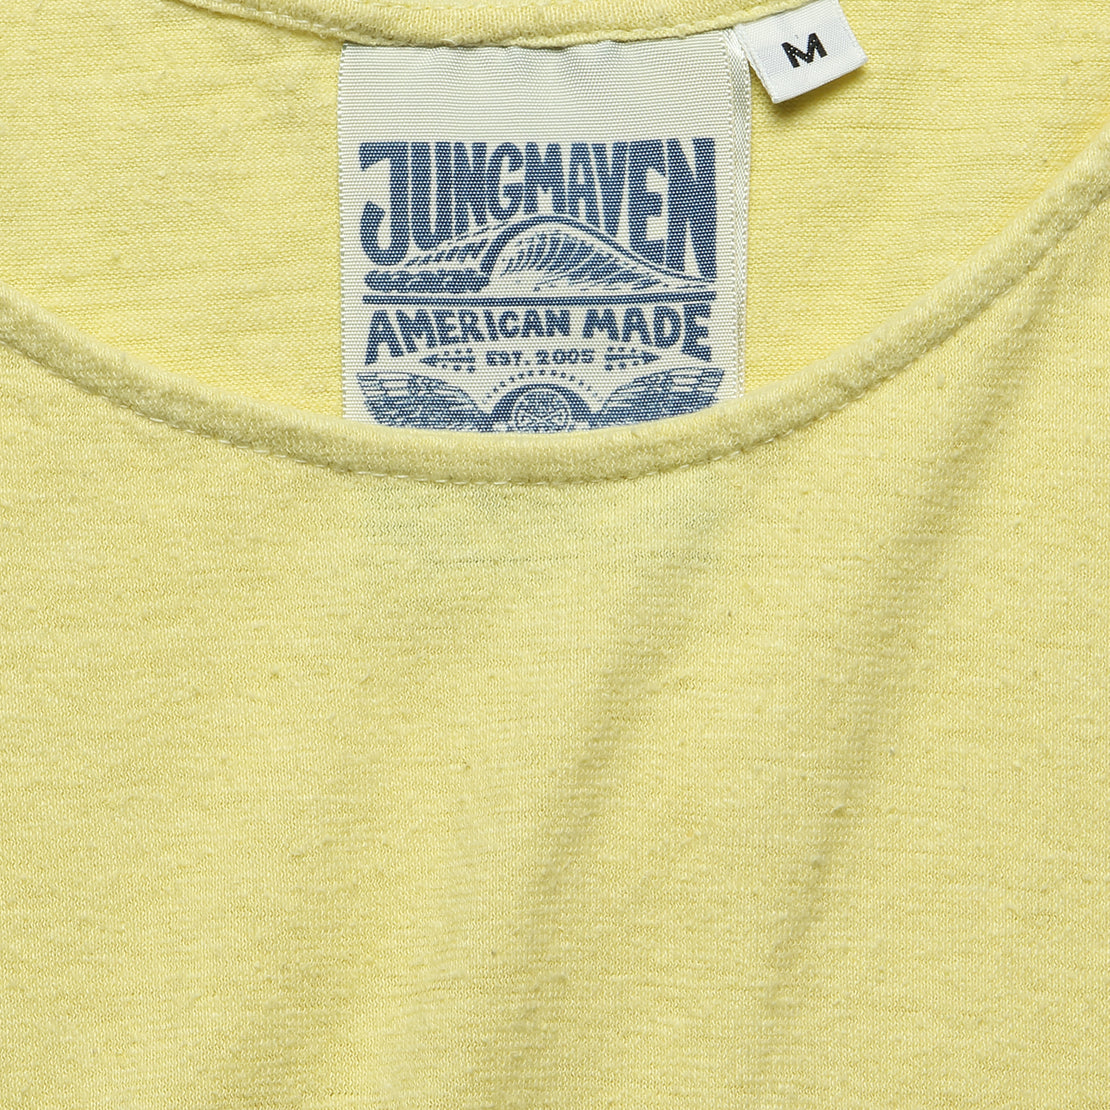 Cropped Tank - Pale Yellow - Jungmaven - STAG Provisions - W - Tops - Sleeveless